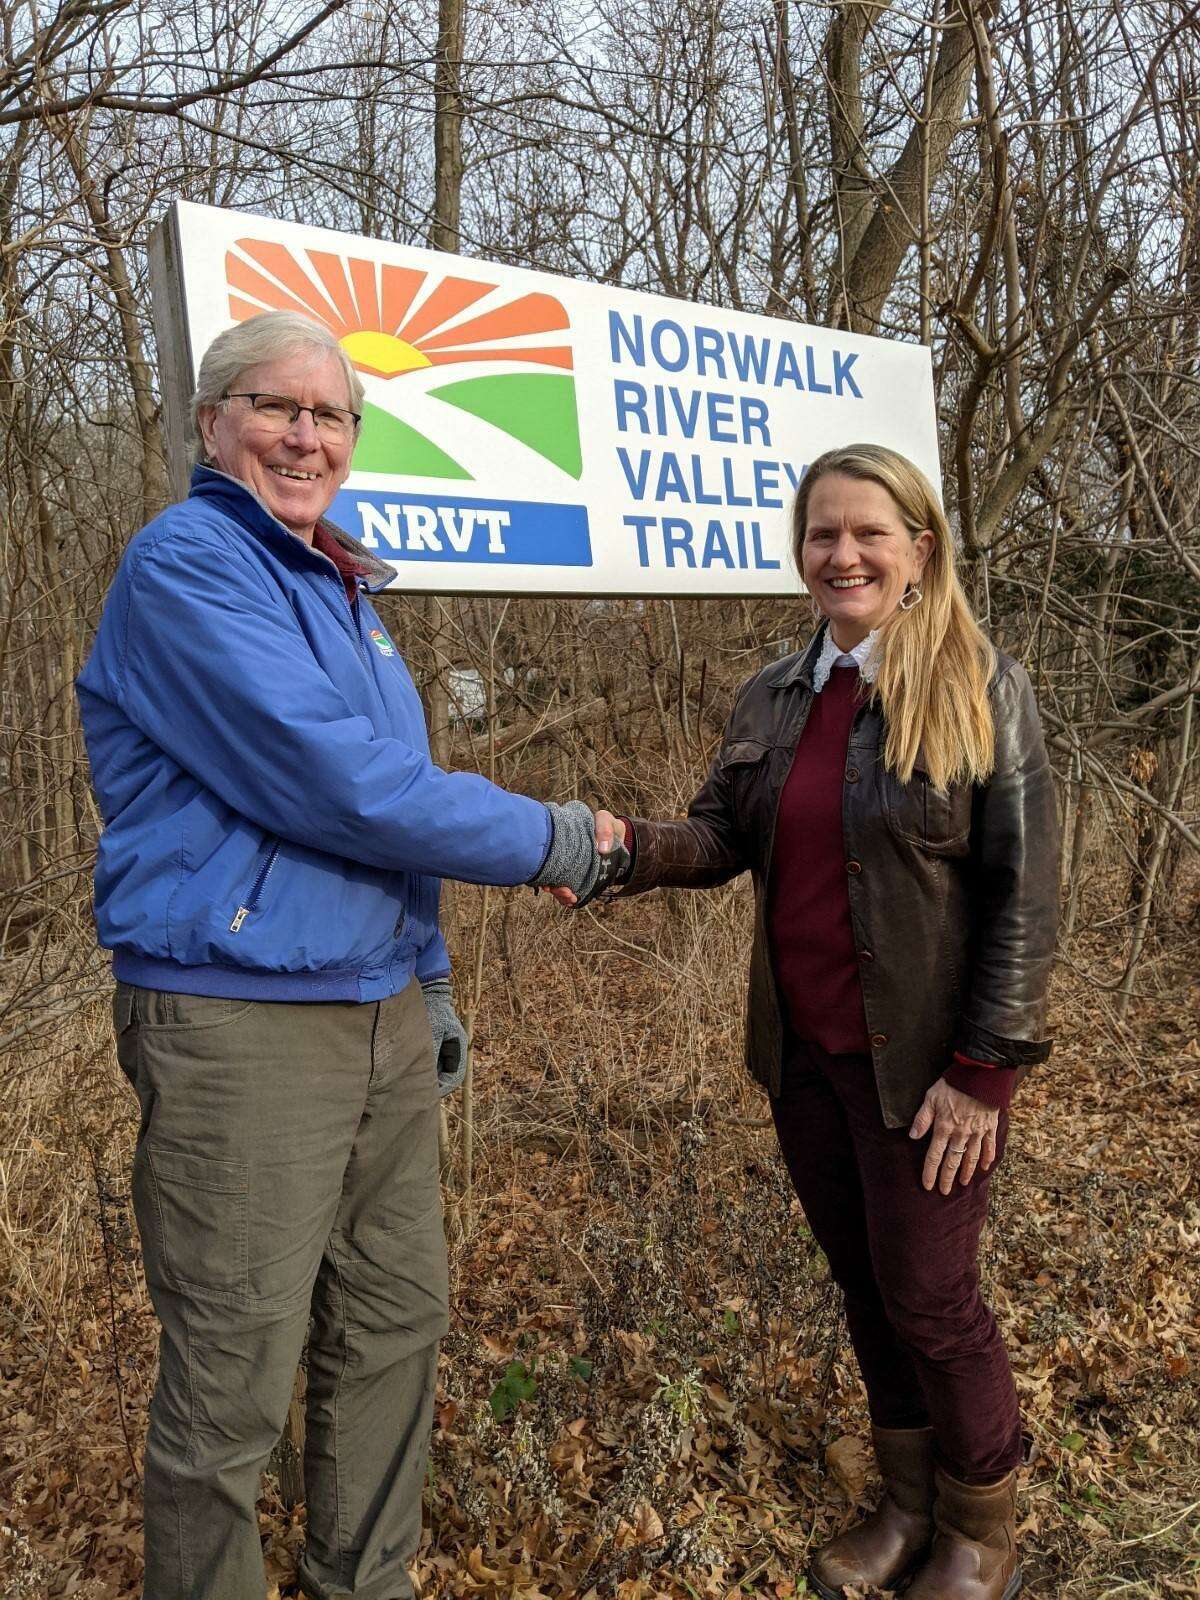 Andrea Gartner, right, will become the Norwalk River Valley Trail’s new executive director on Jan. 3, 2022.